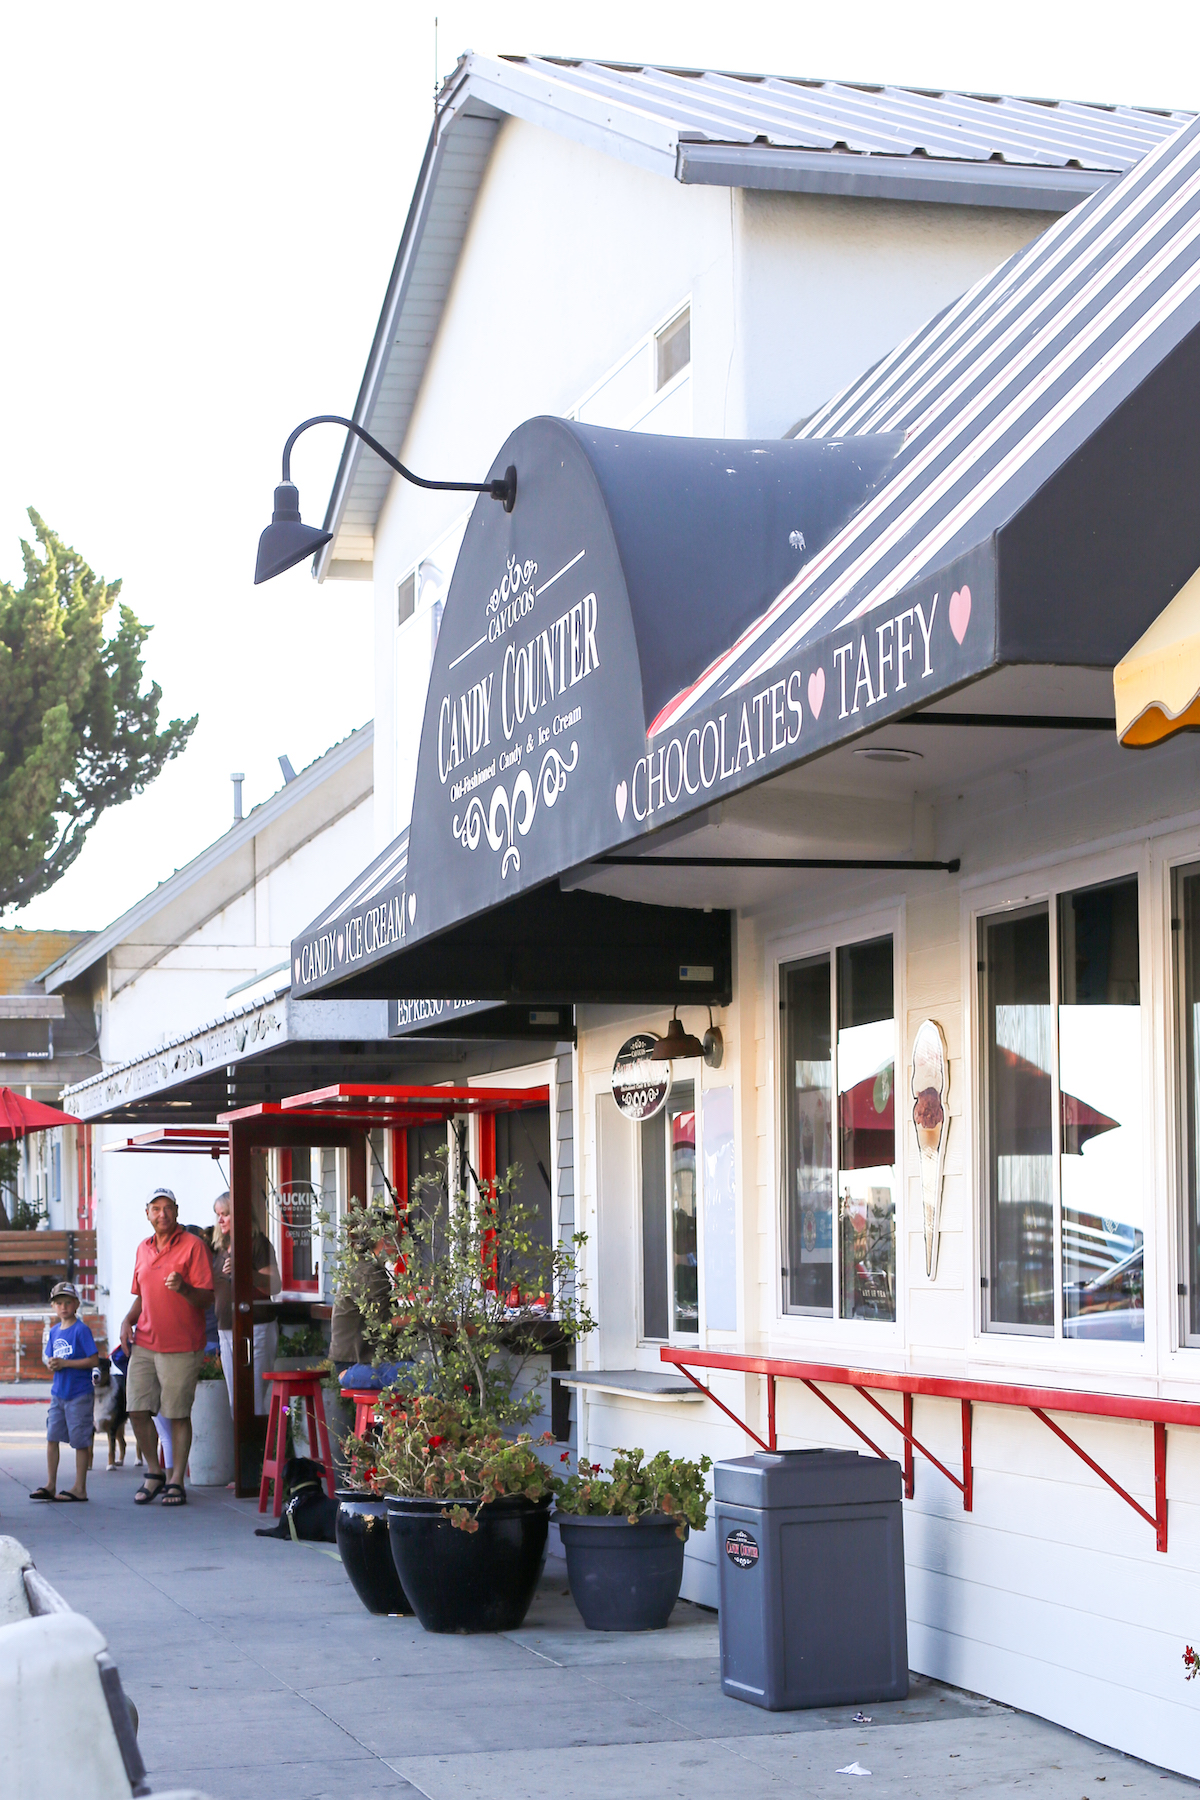 Exterior of the Candy Counter shop with it's black awnings and red bar